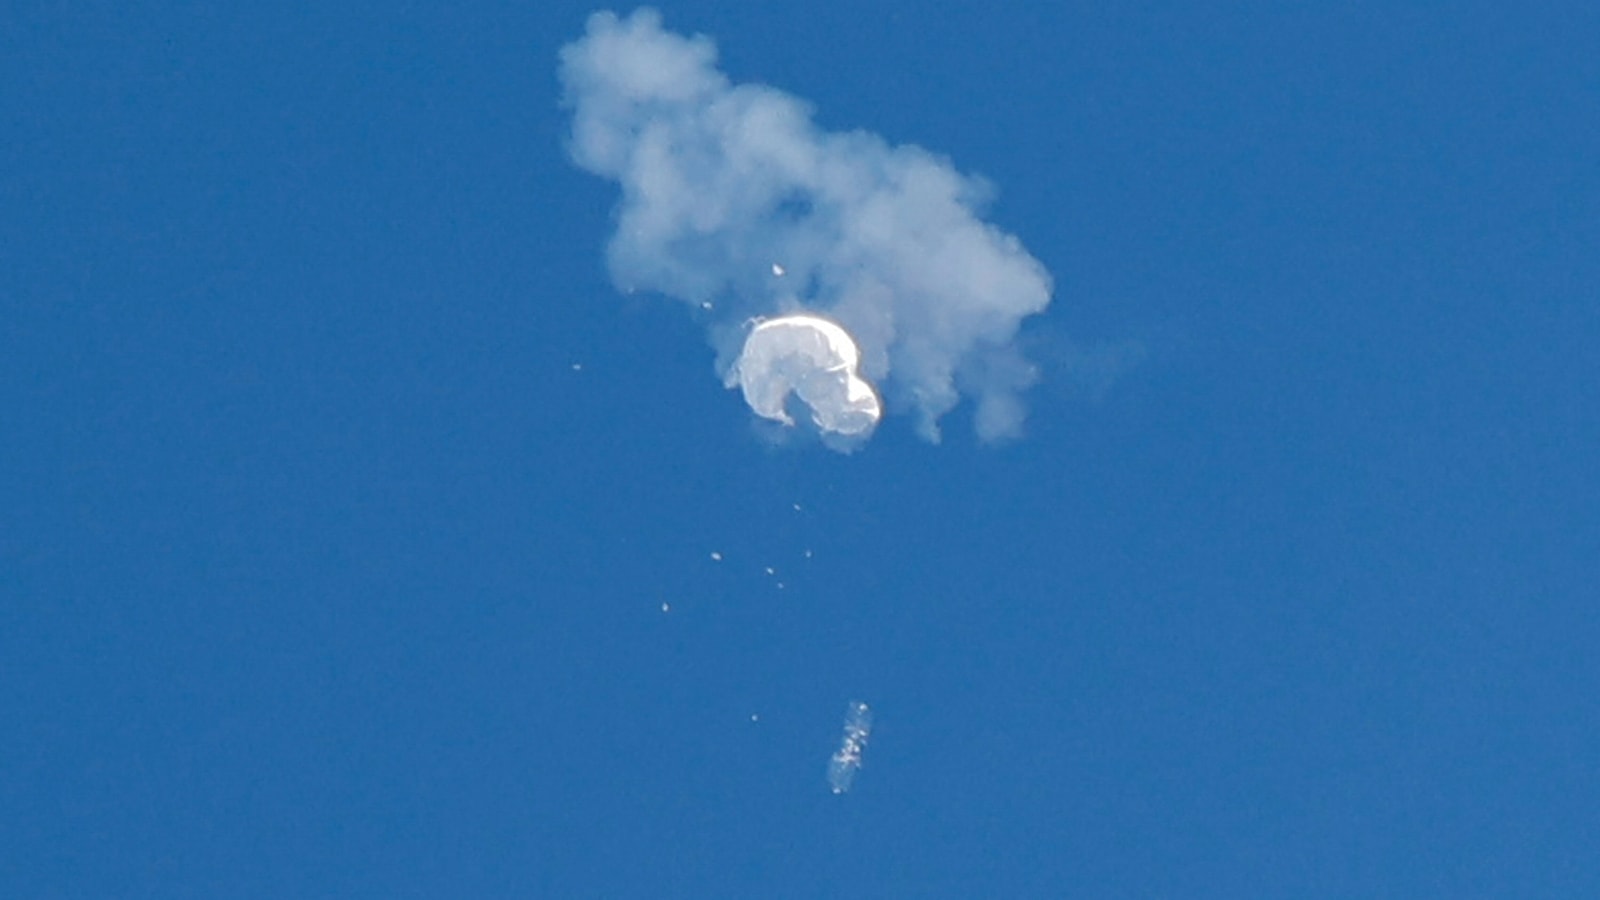 Videos capture the moment US fighter jet shot down Chinese ‘spy’ balloon